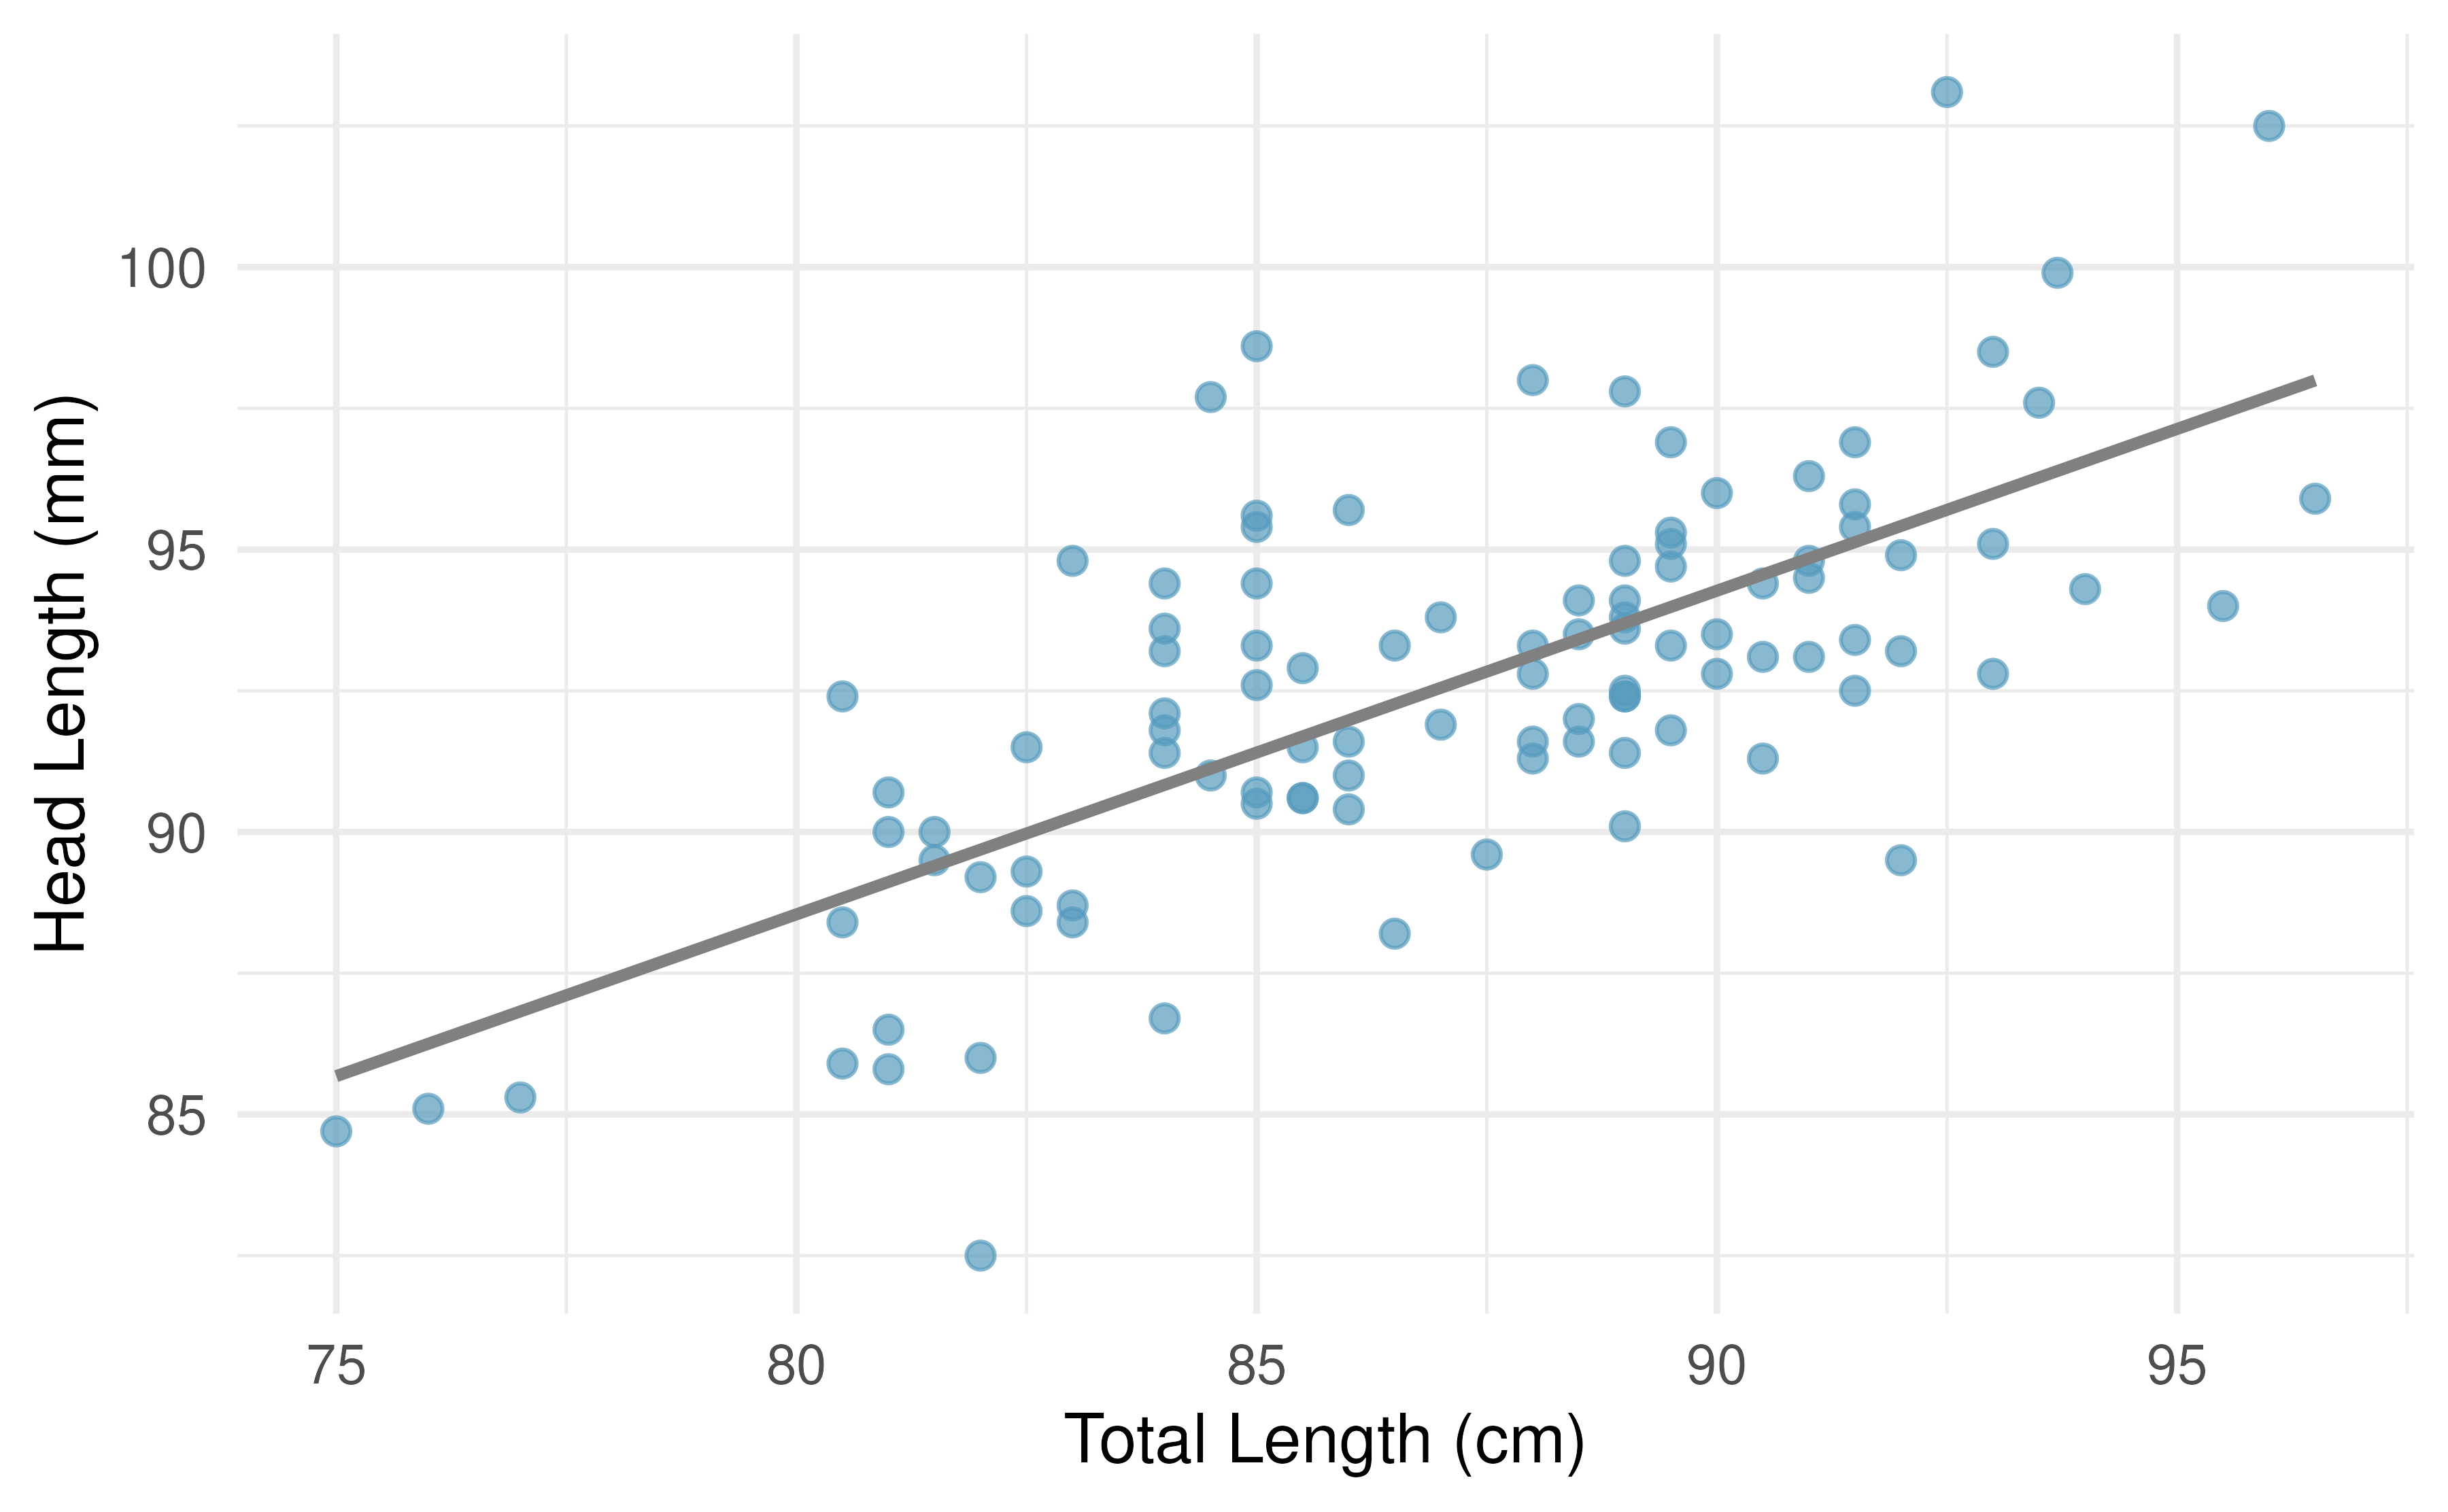 A reasonable linear model was fit to represent the relationship between head length and total length.